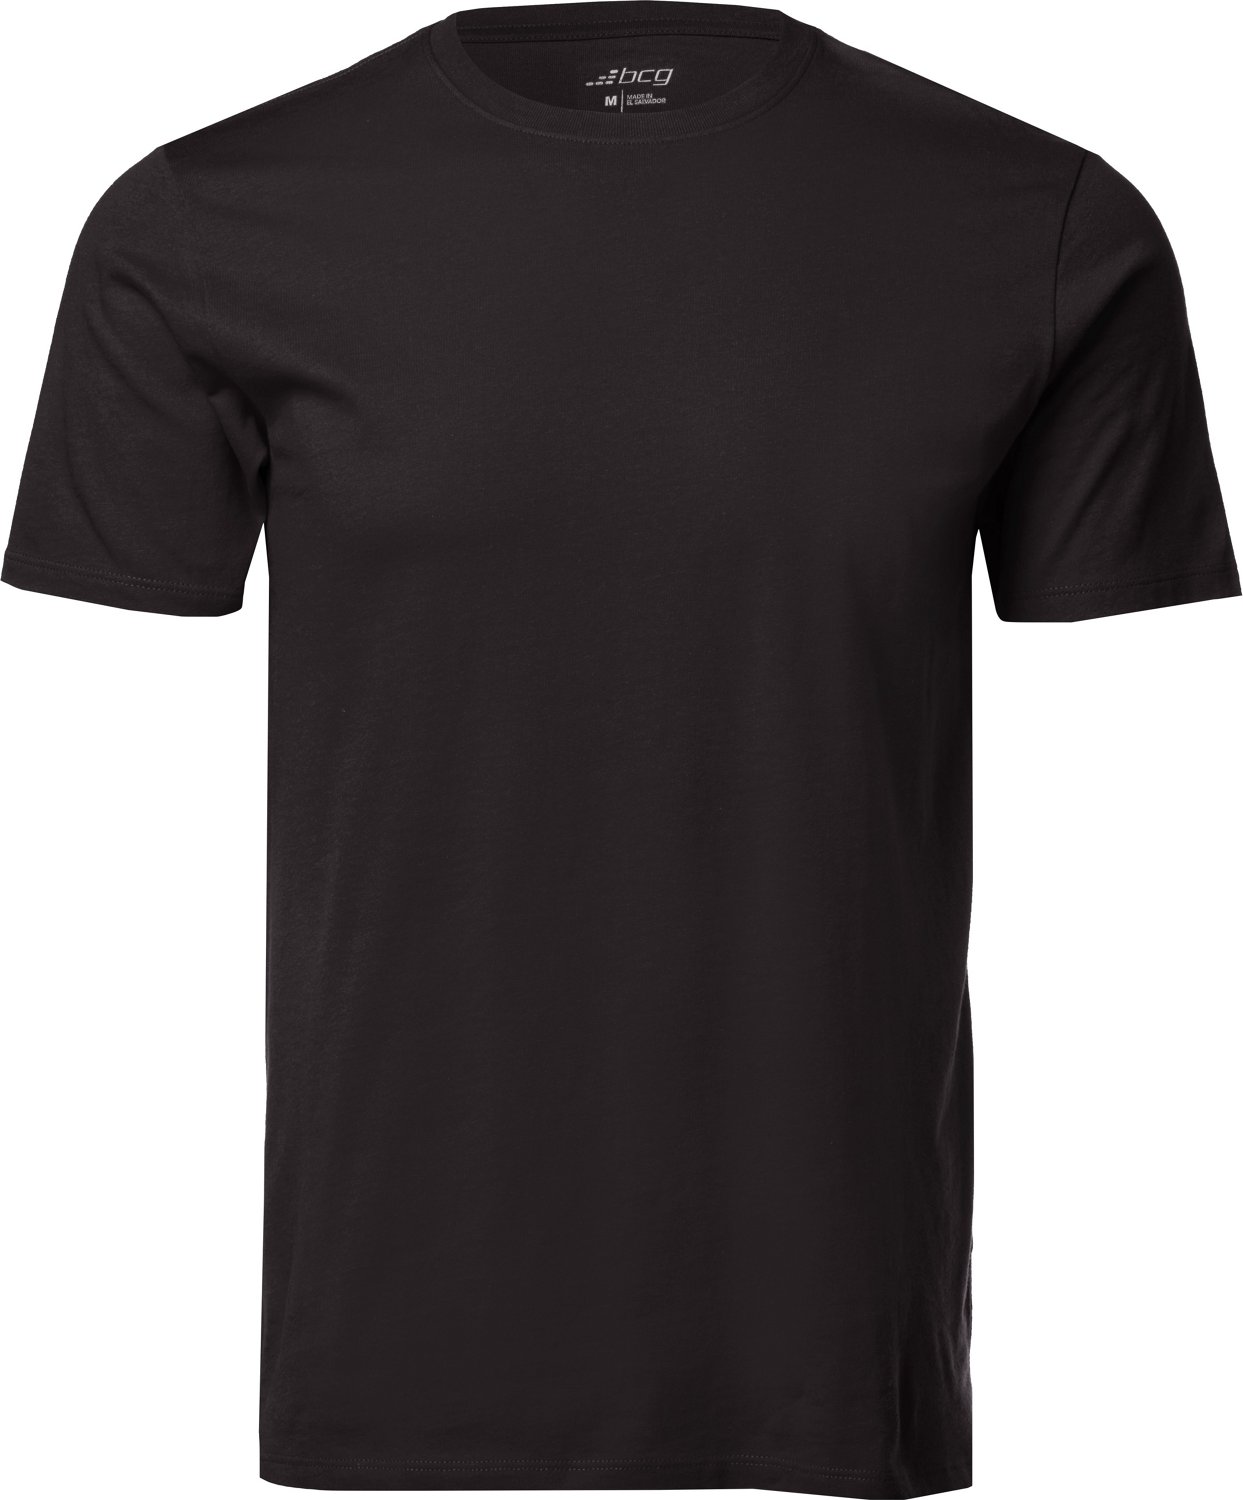 BCG T-Shirt Mens Small Black Short Sleeve Active Stretch Gym Work Out